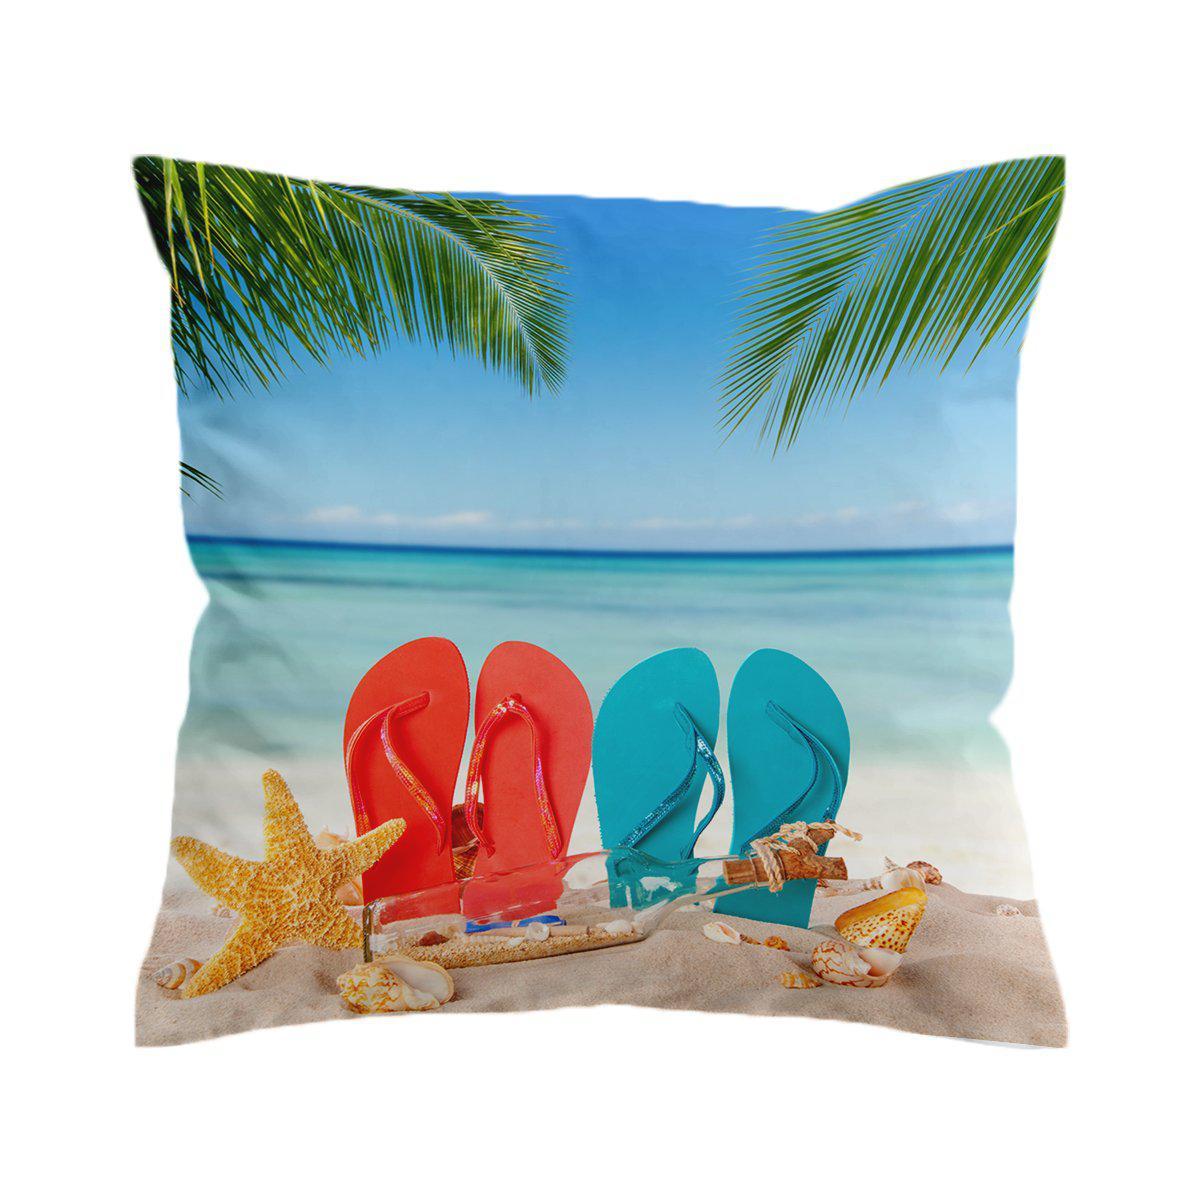 Flip Flops in the Sand Pillow Cover